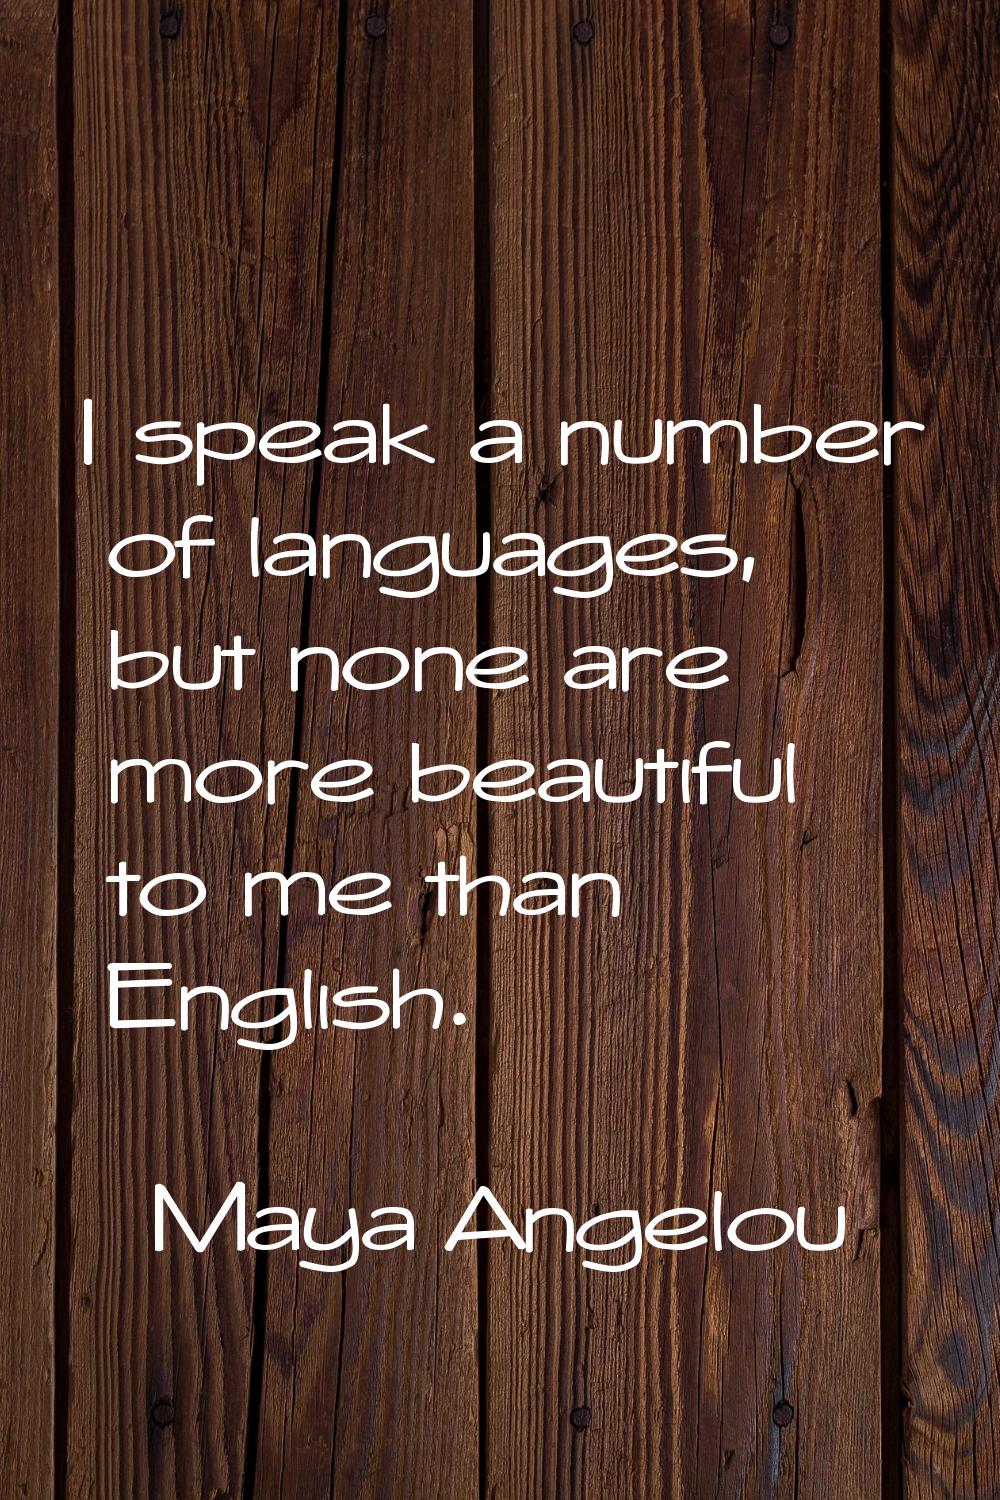 I speak a number of languages, but none are more beautiful to me than English.